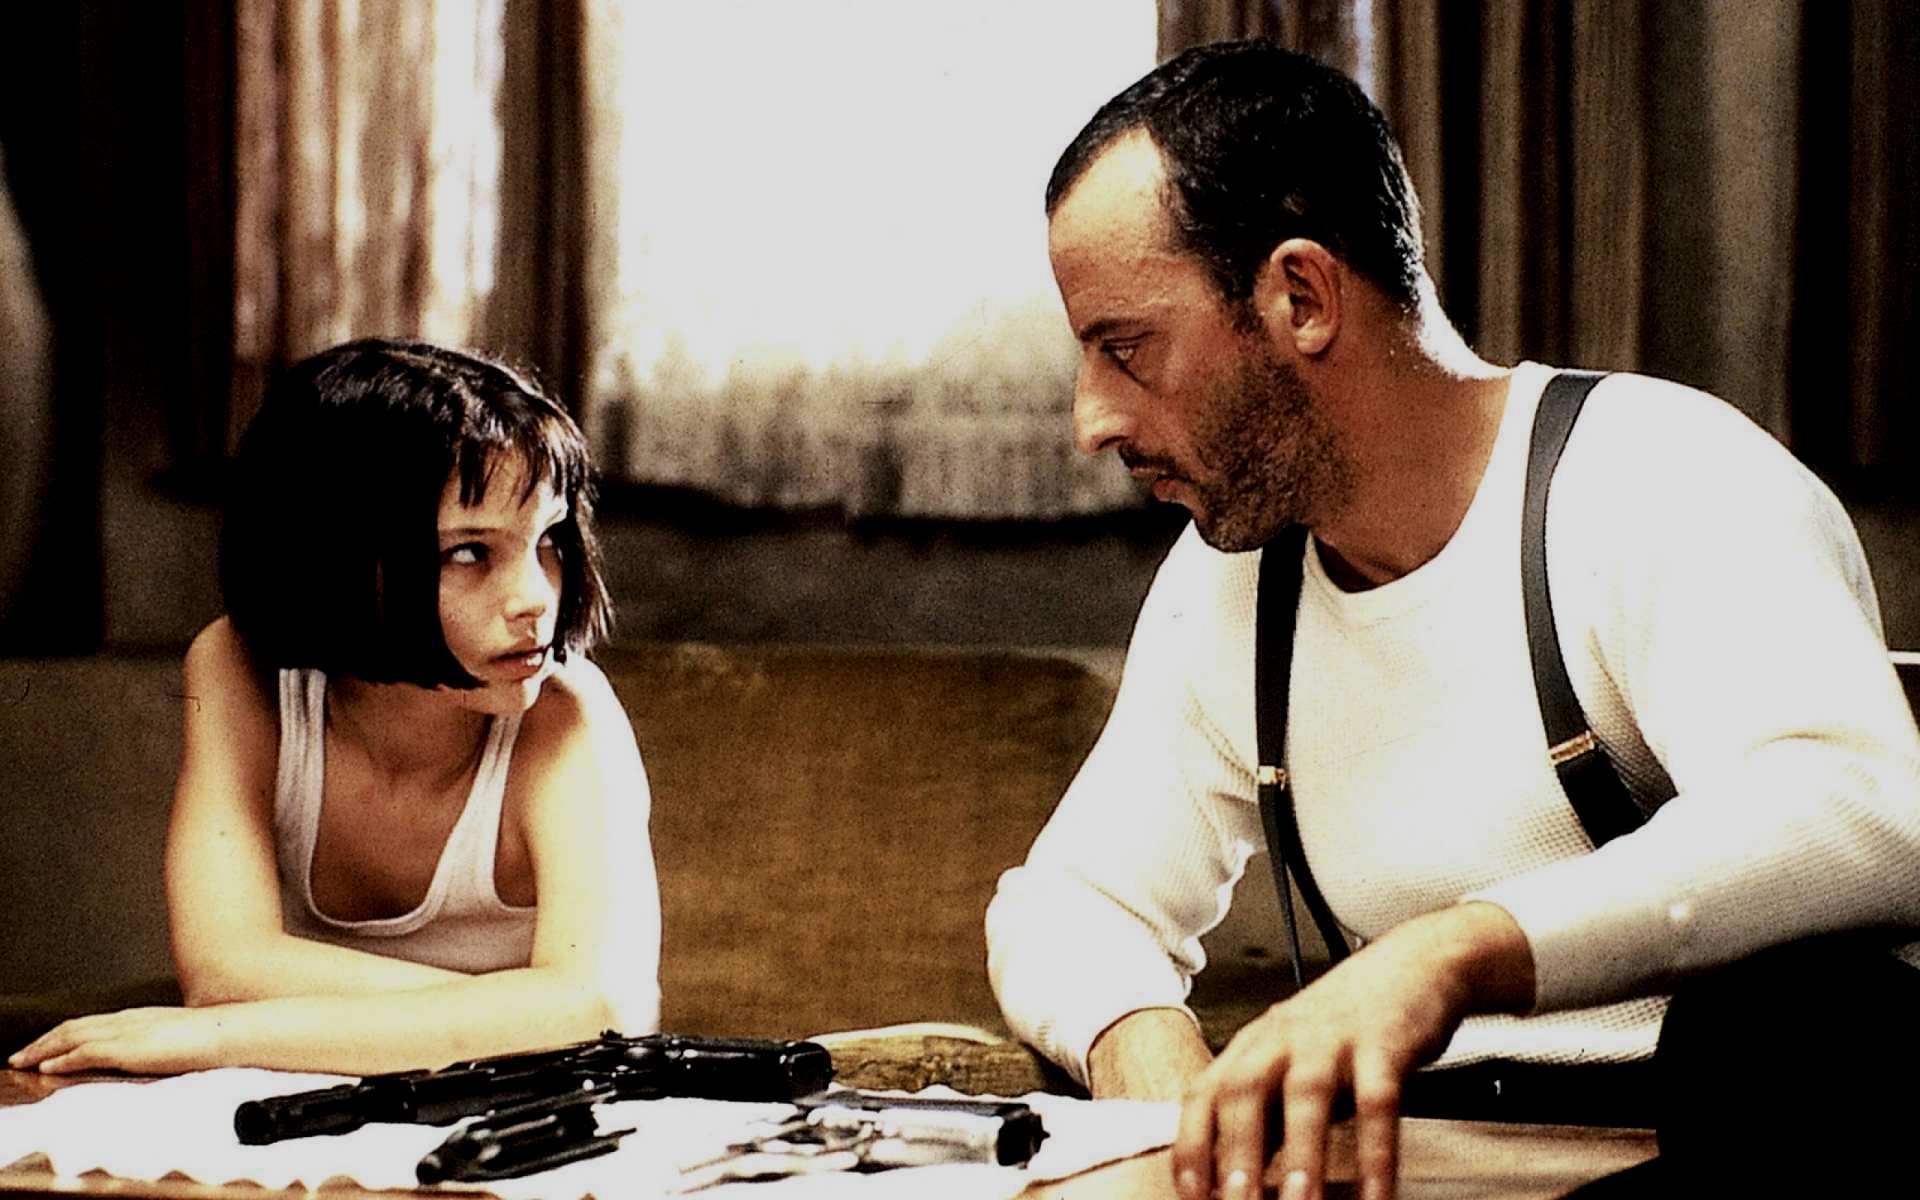 Leon and Mathilda have a tense talk in Leon: The Professional